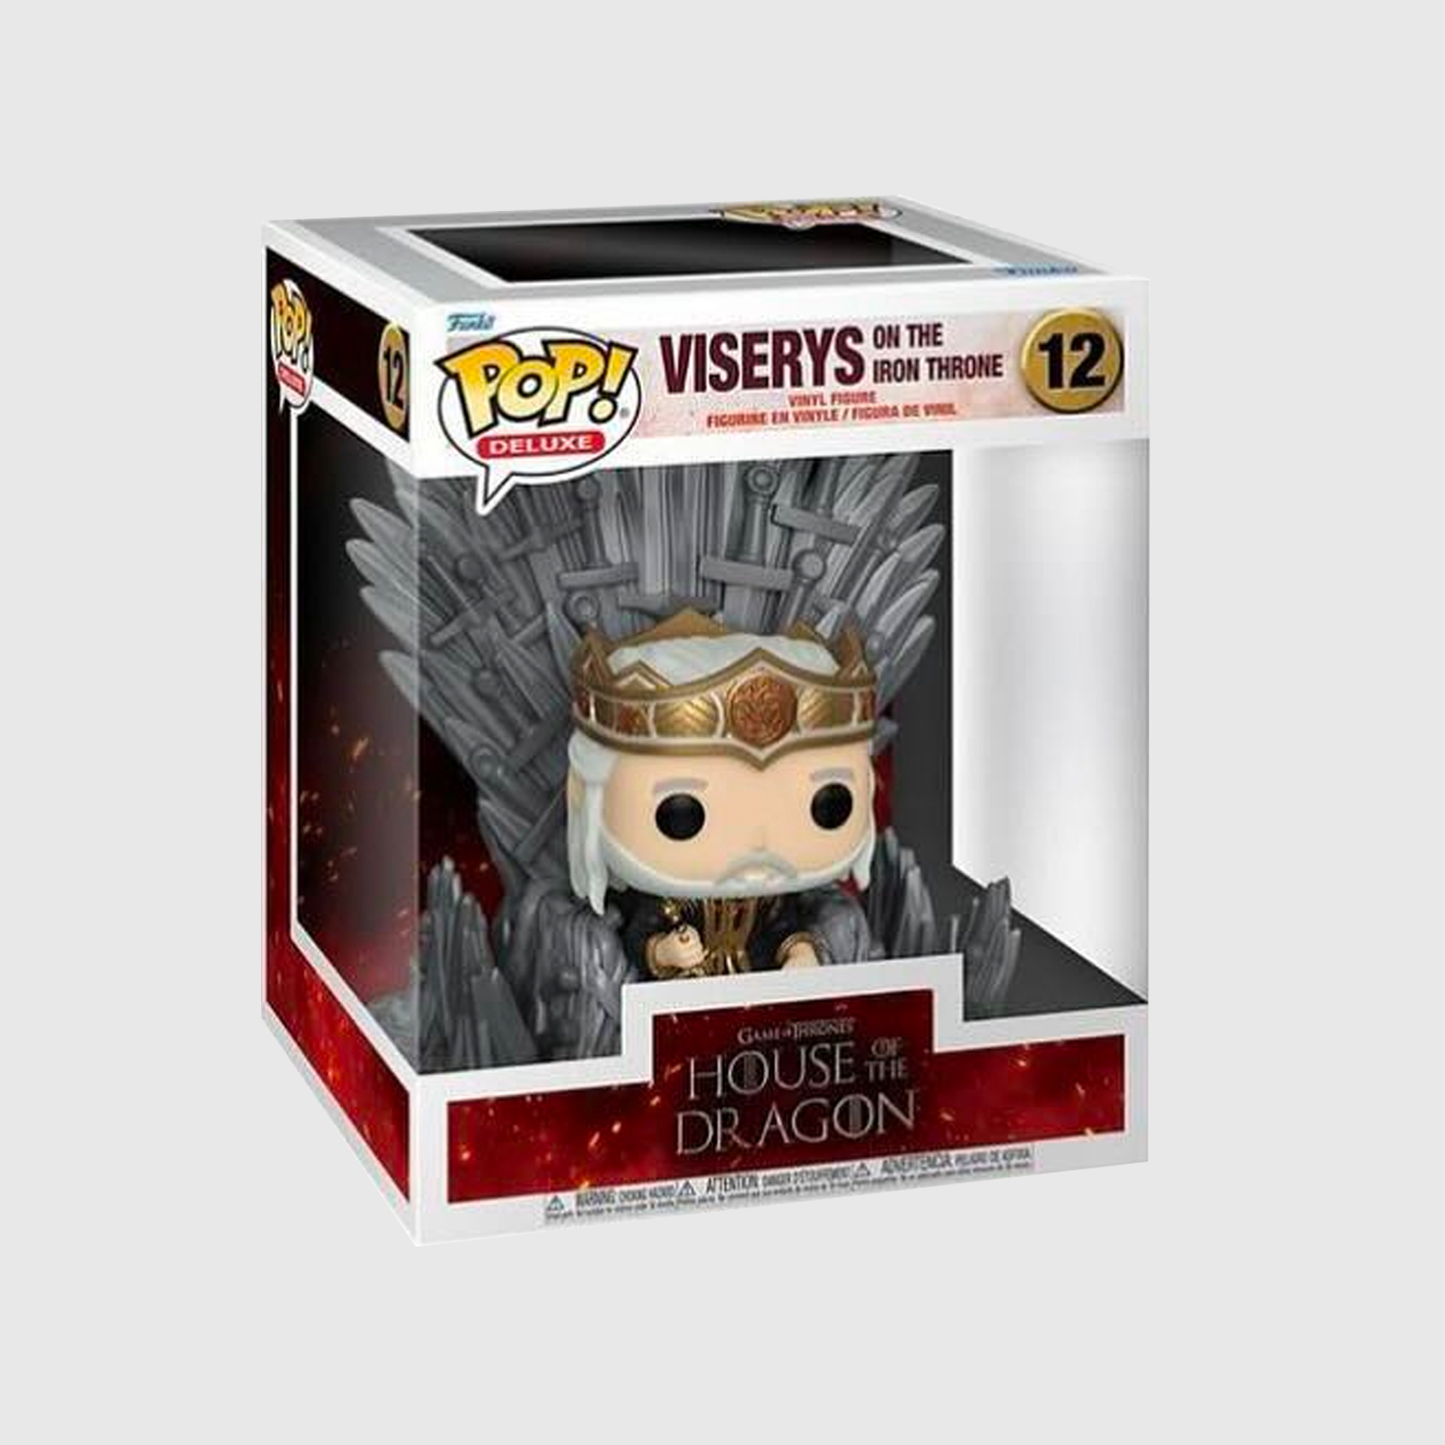 (PRE-ORDER) Funko POP! Deluxe: House of the Dragon - Viserys on the Iron Throne #12